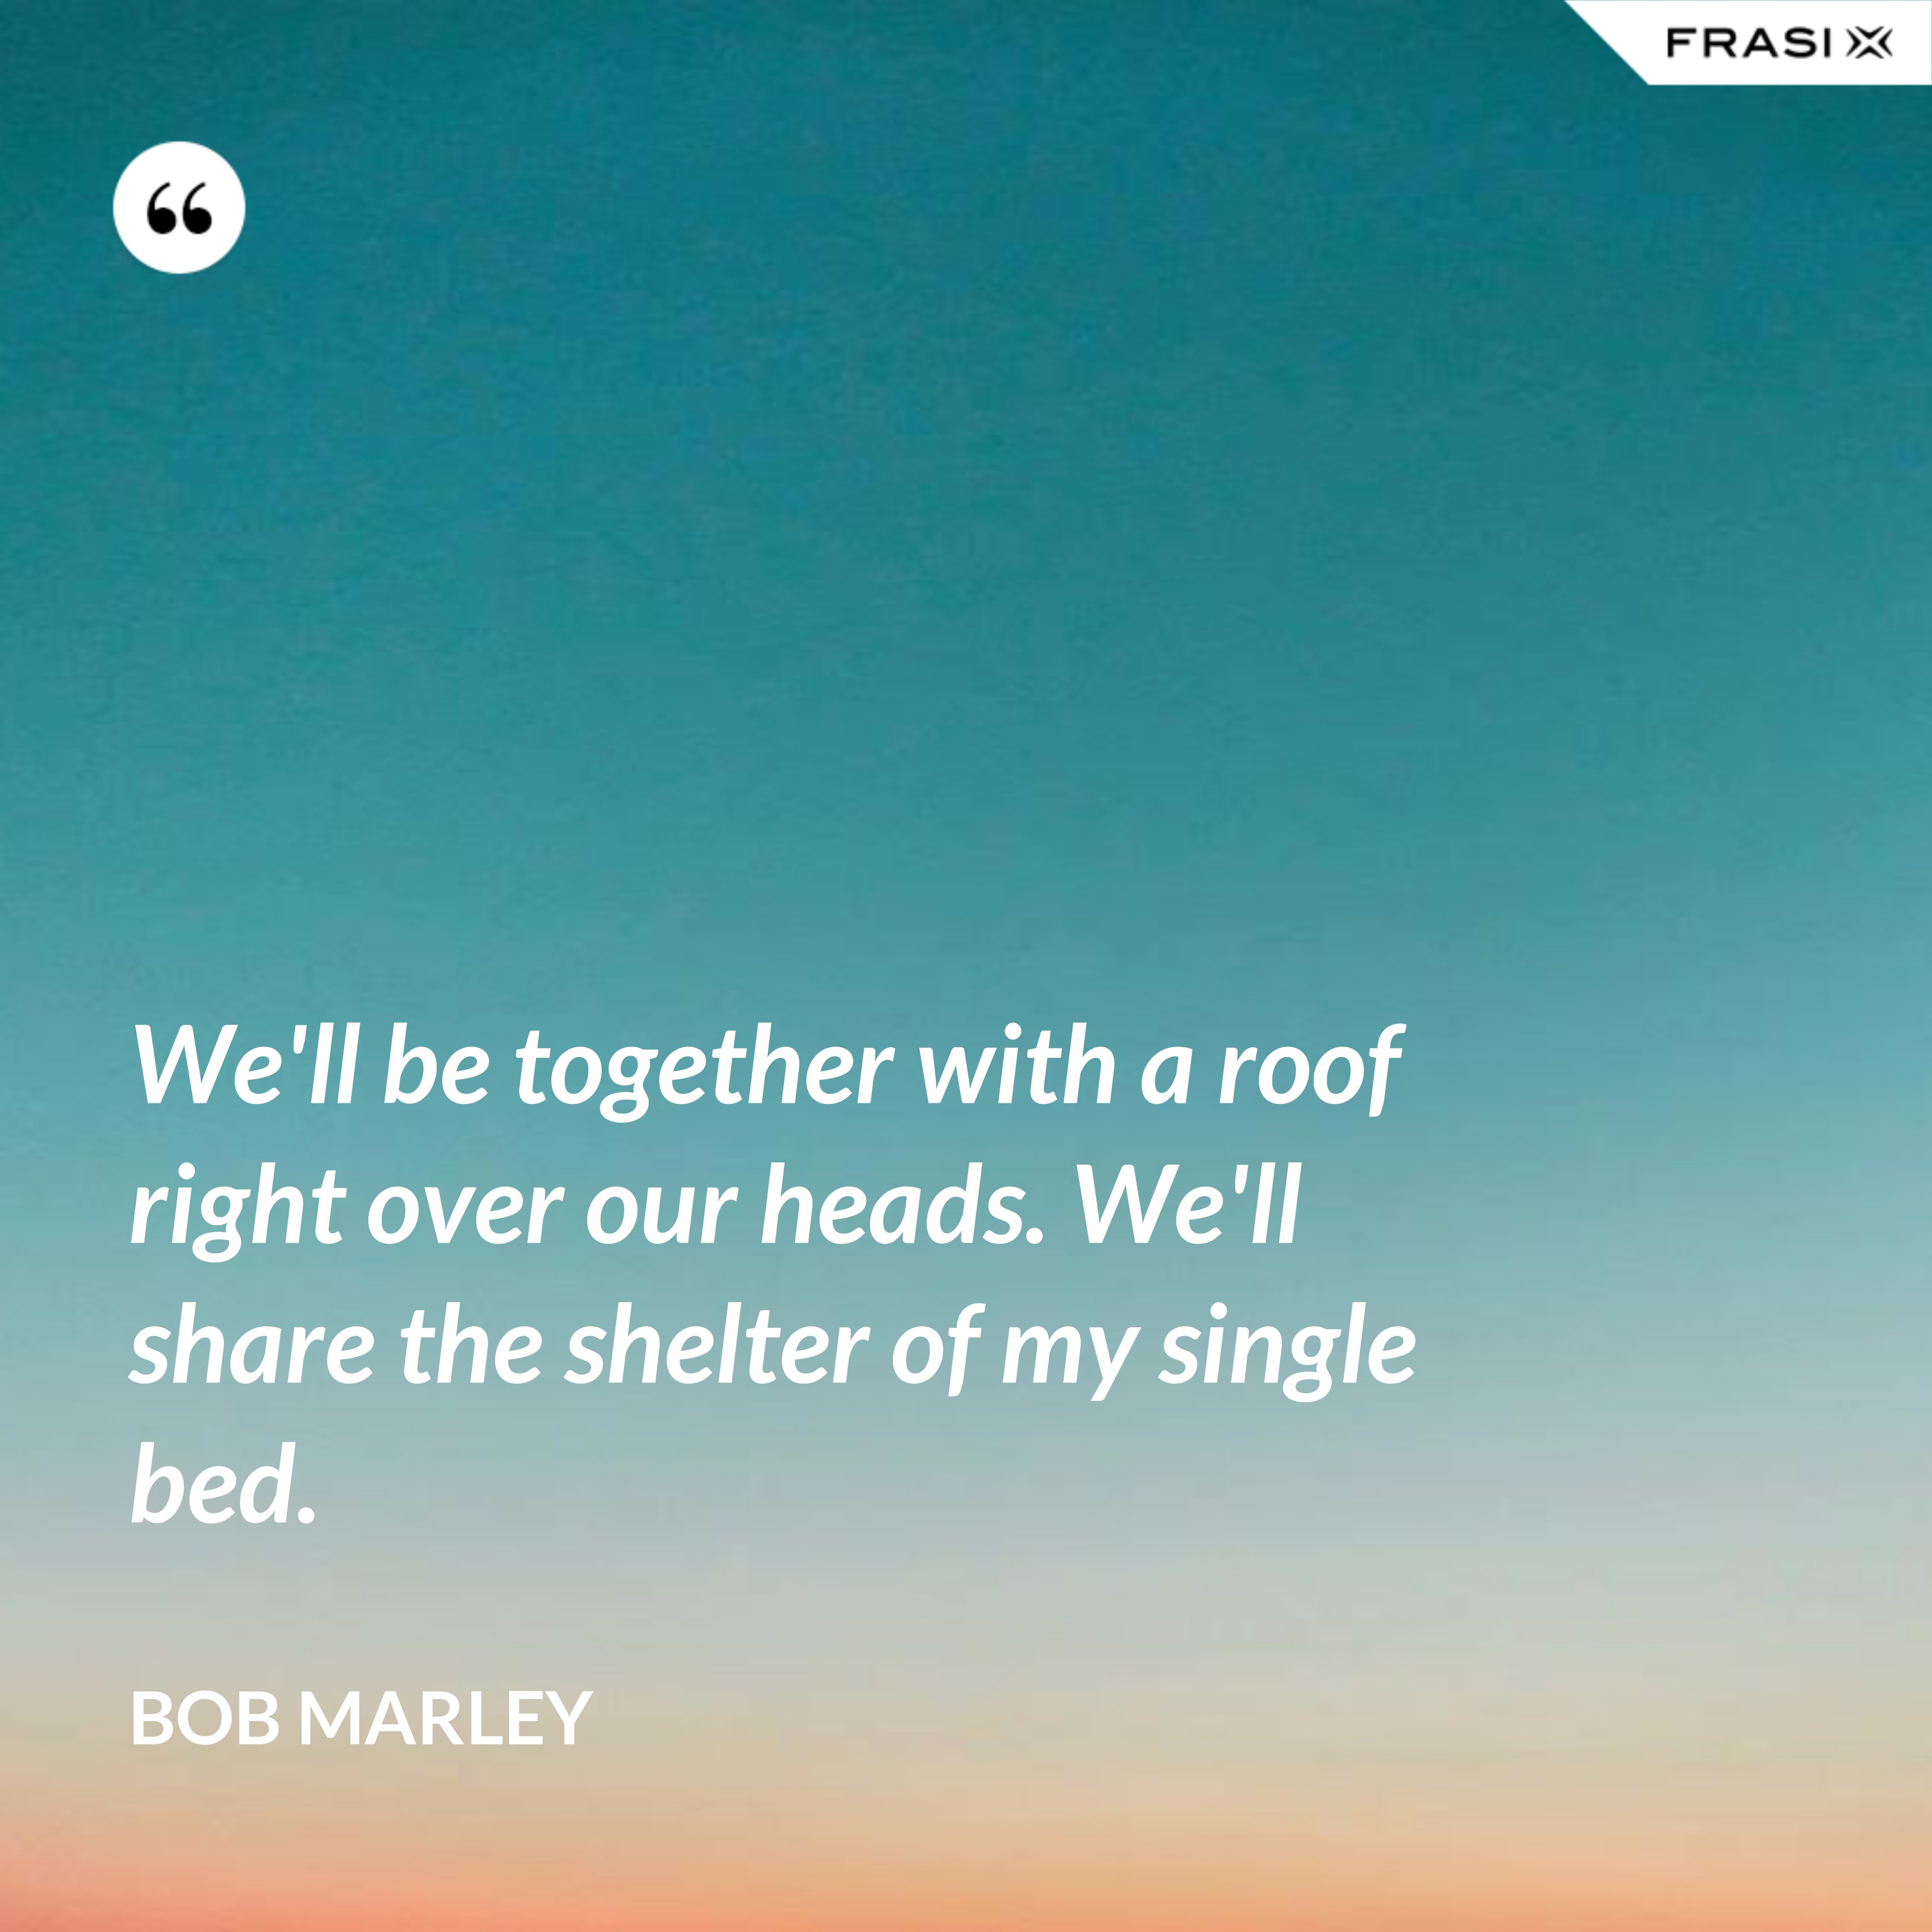 We'll be together with a roof right over our heads. We'll share the shelter of my single bed. - Bob Marley